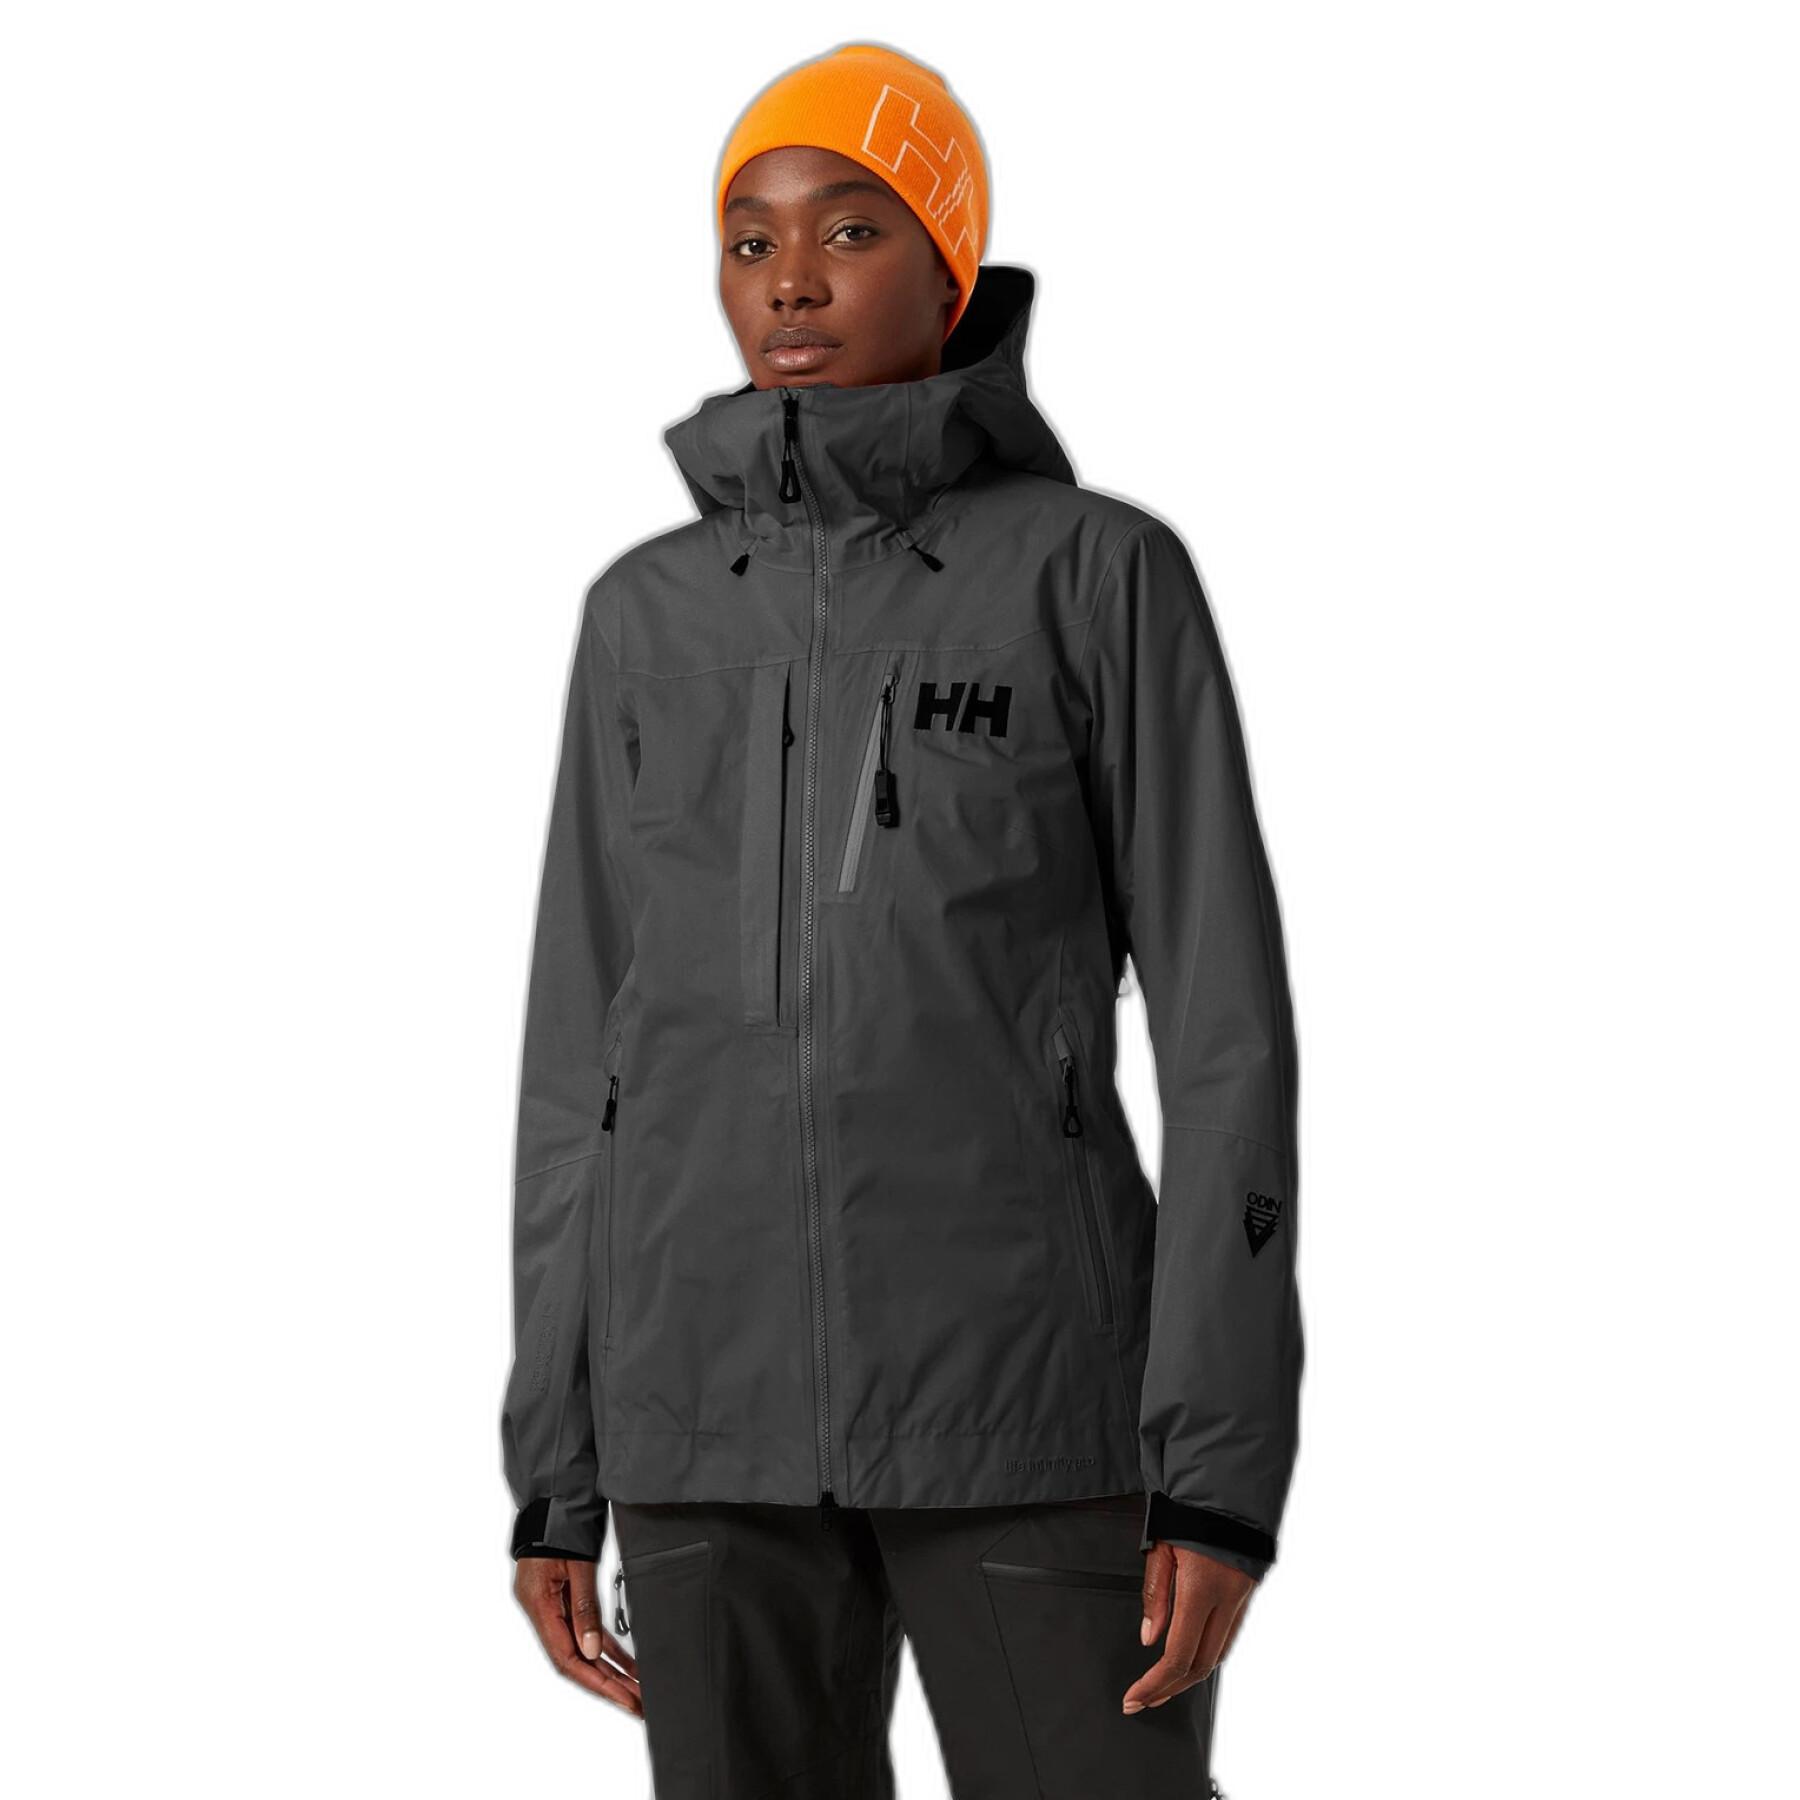 Chaqueta impermeable aislante mujer Helly Hansen odin infinity